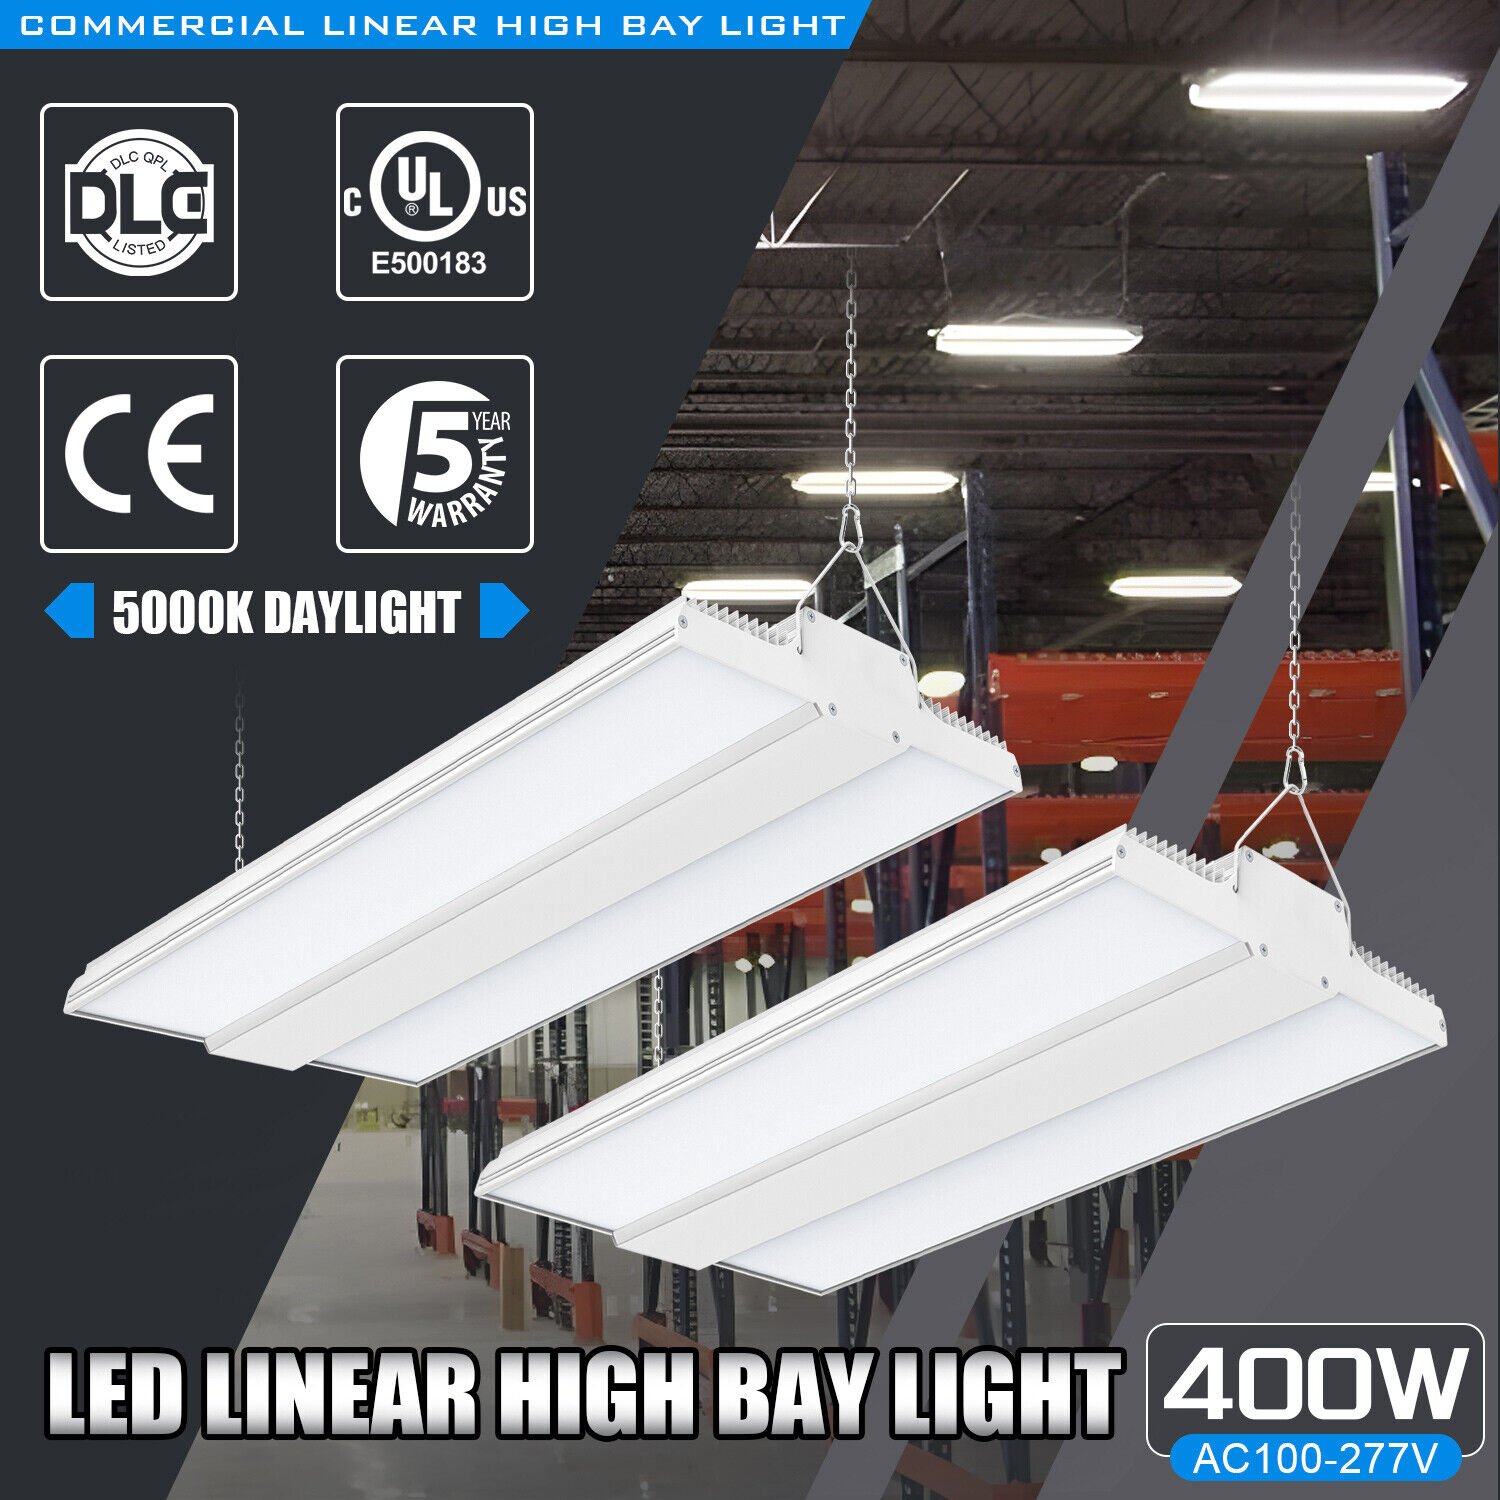 2 Pack - 400W LED Linear High Bay Light  Equiv. 1500W MH/HPS Commercial Fixtures